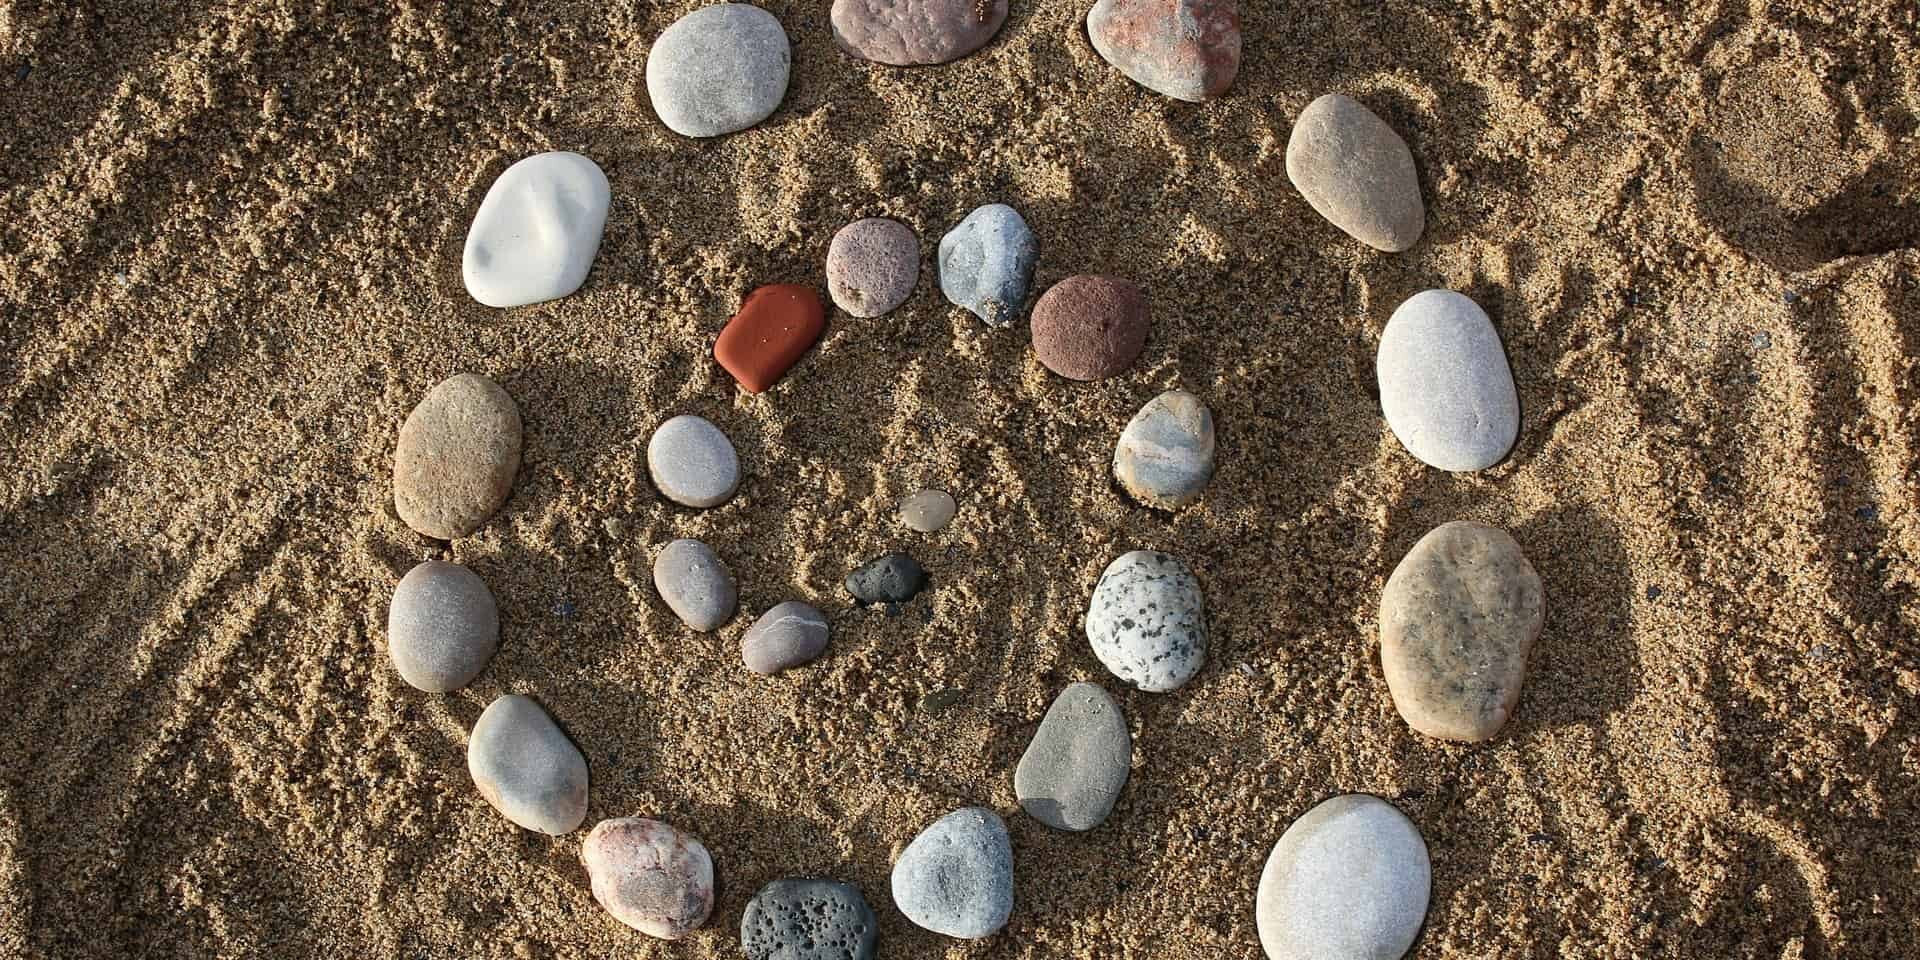 Stones in sand: Akashic Wisdom with Suzanne West